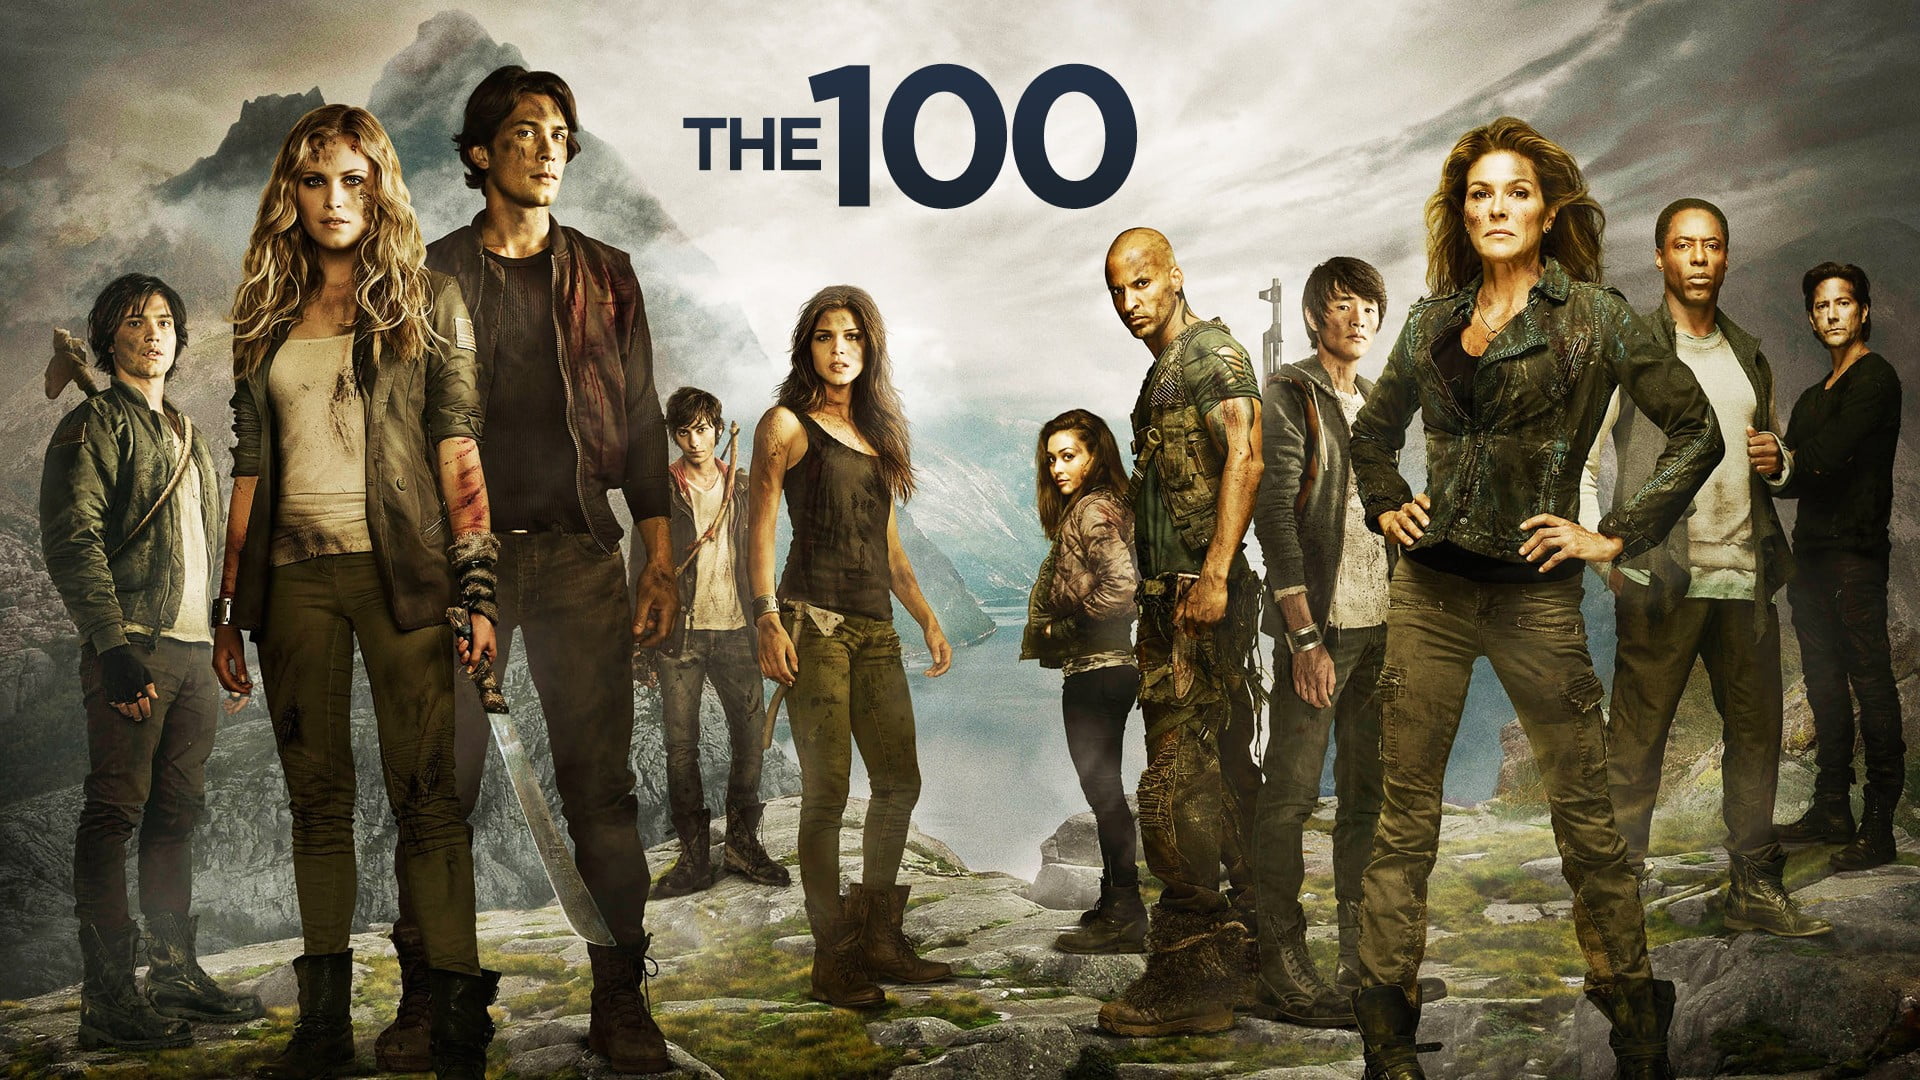 The 100 wallpaper, Eliza Taylor, young adult, group of people